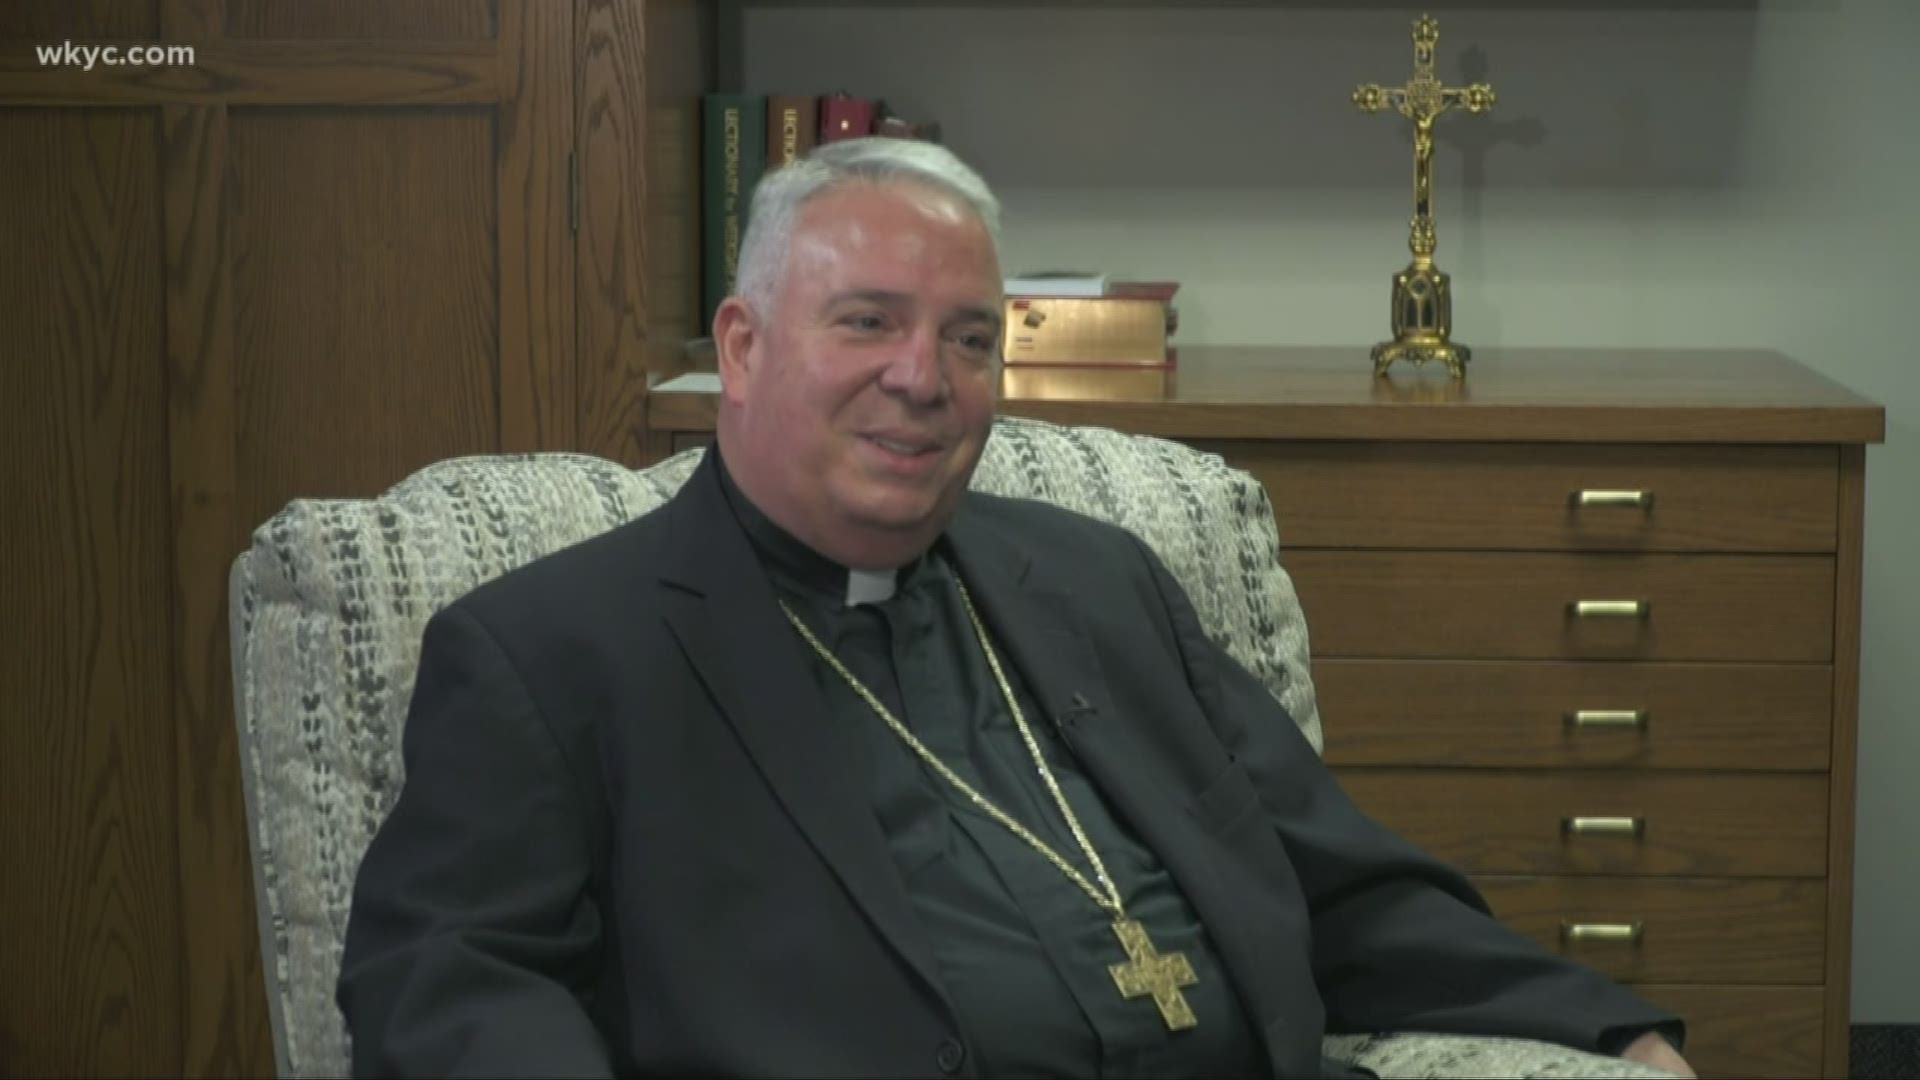 Cleveland Bishop Nelson Perez is preparing for his final days serving the Diocese of Cleveland before leaving to begin his new role as Archbishop of Philadelphia.